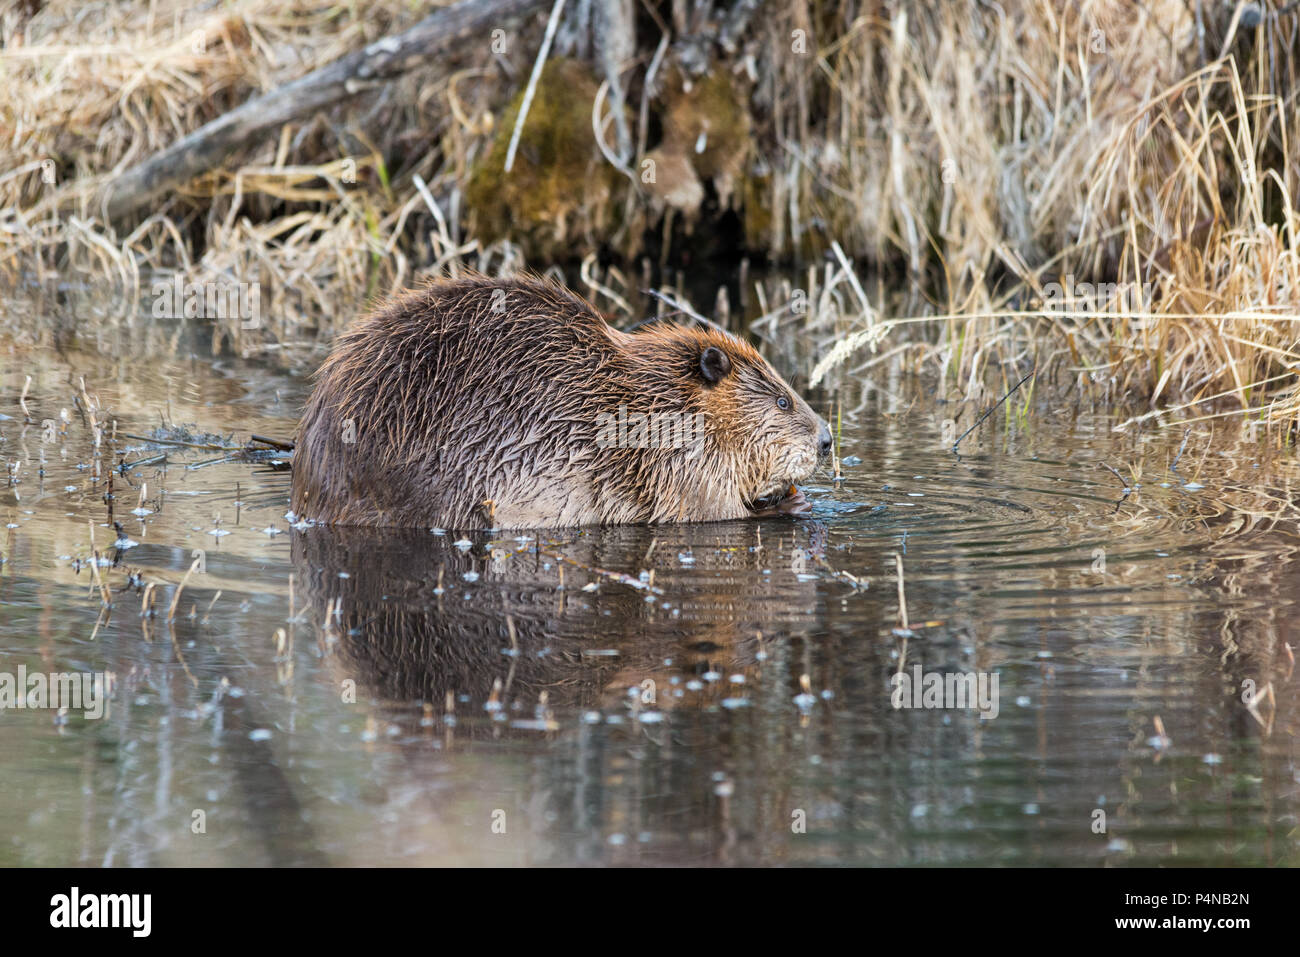 a Juvenile beaver in the shallow pond eating roots Stock Photo